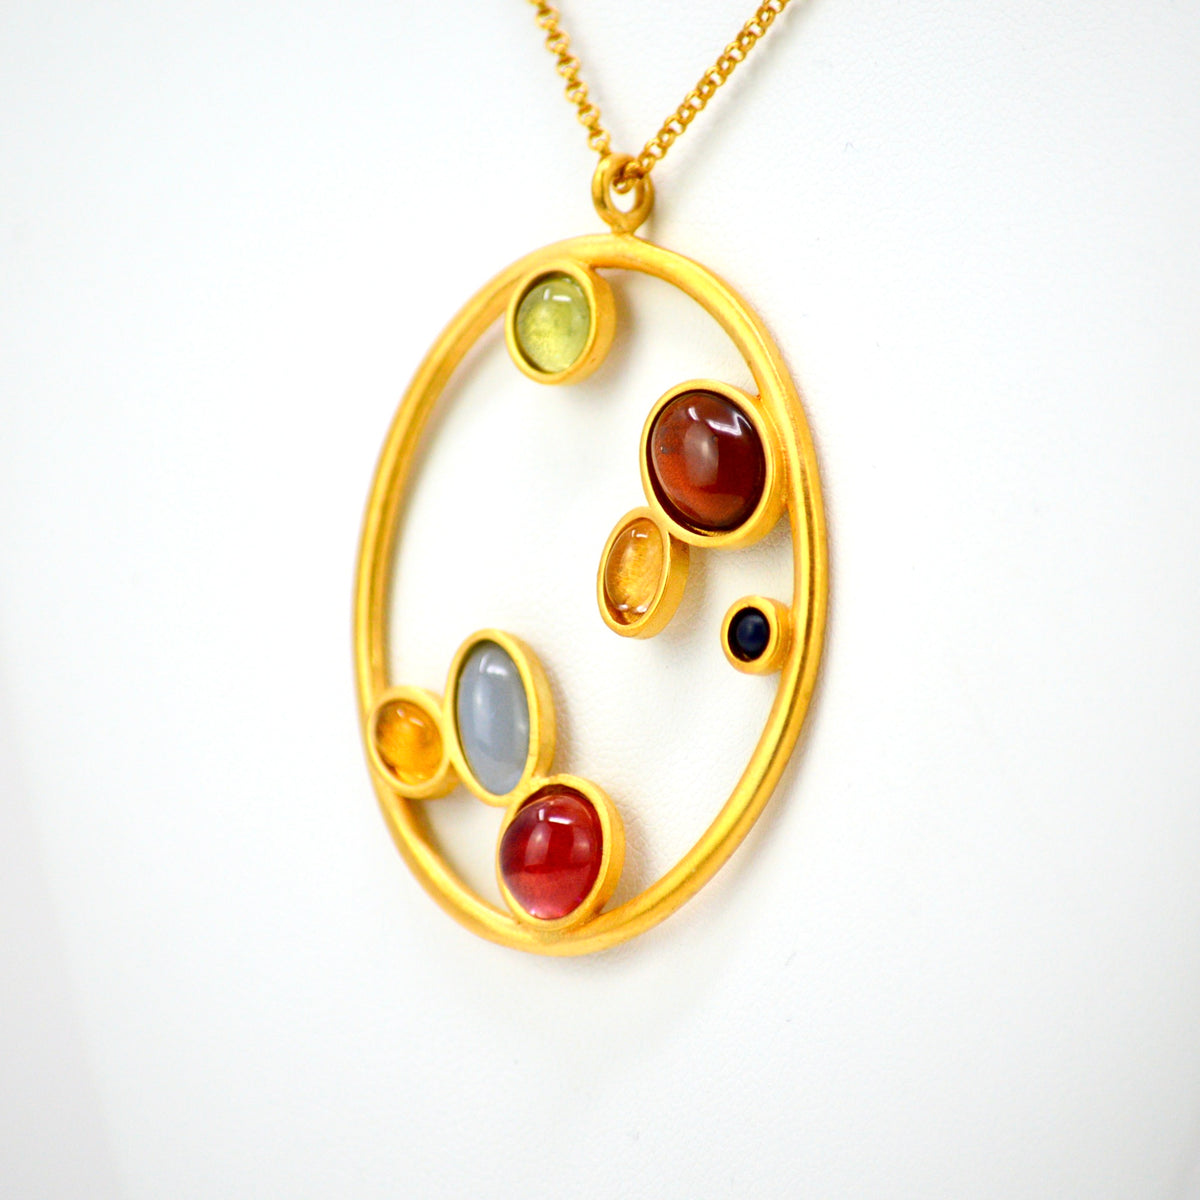 Alegria Large Pendant with Murano Glass Beads, Gold, Made in Italy - MyItalianDecor